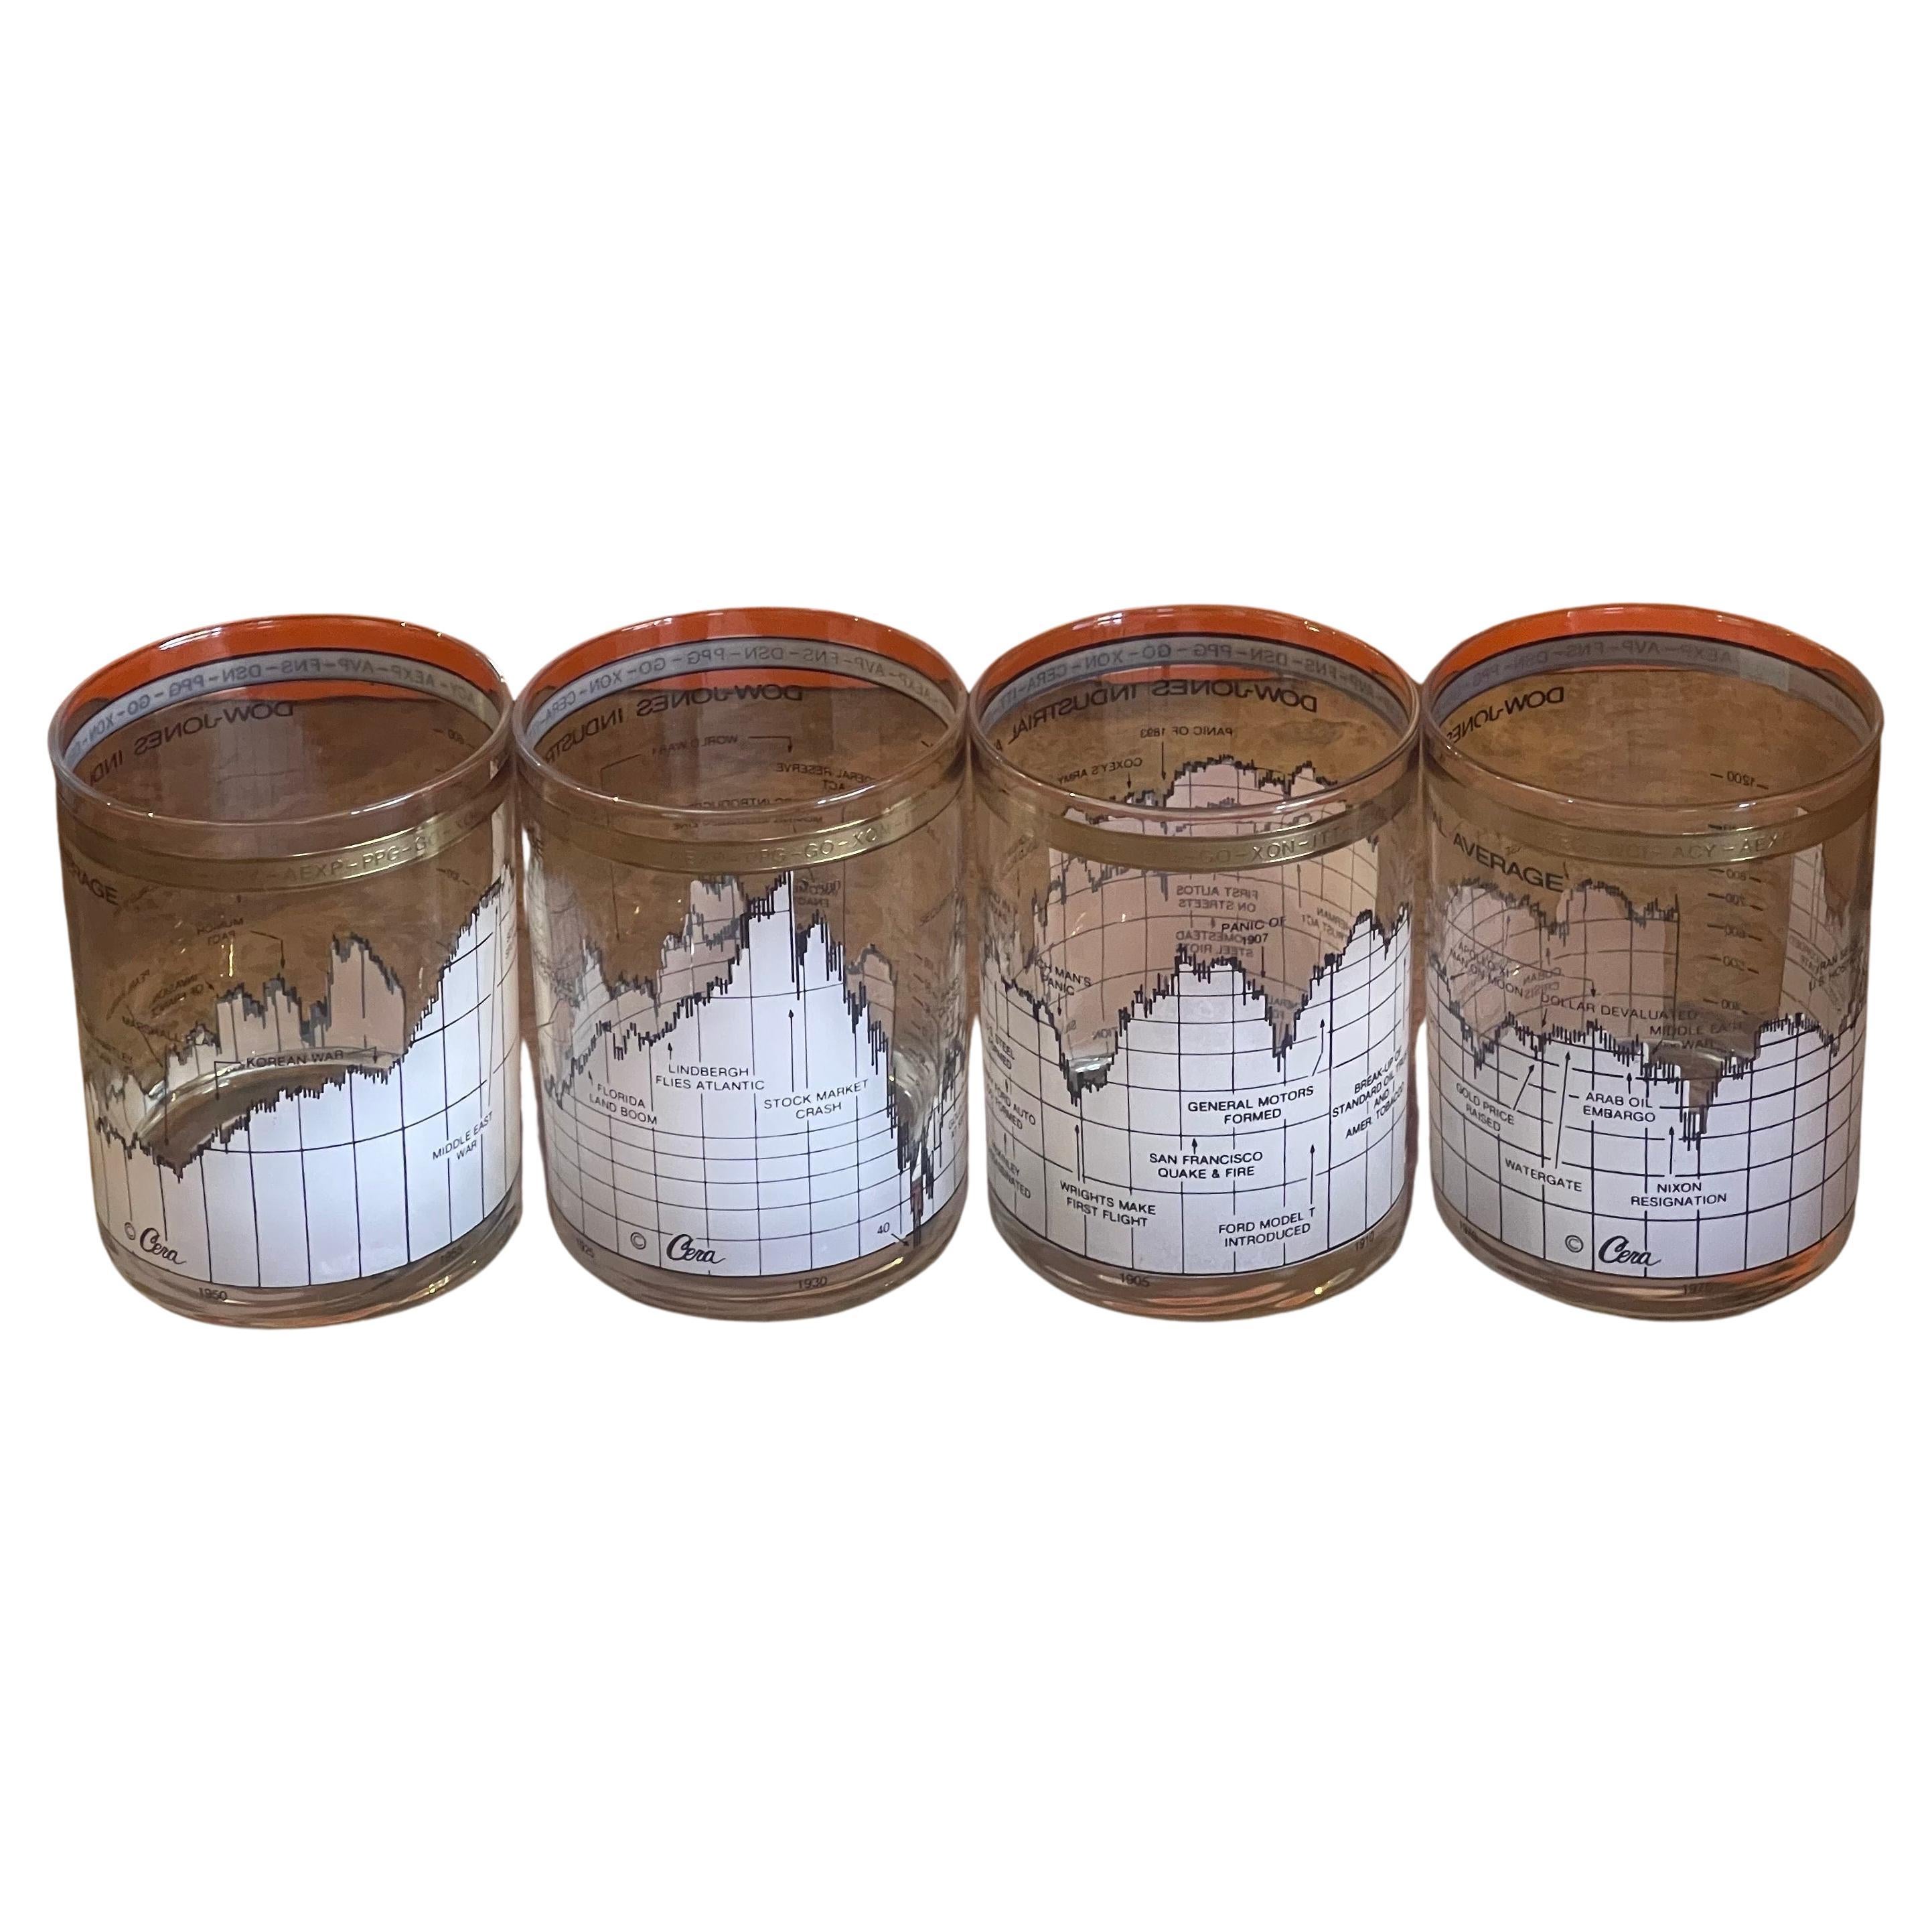 Great set of four double old fashioned glasses (14oz) tracking the Dow Jones Industrial Average (DJIA) from 1890s to 1980s by Cera. Each glass is different and captures 20 to 30 years of current events and their impact on the stock market. The